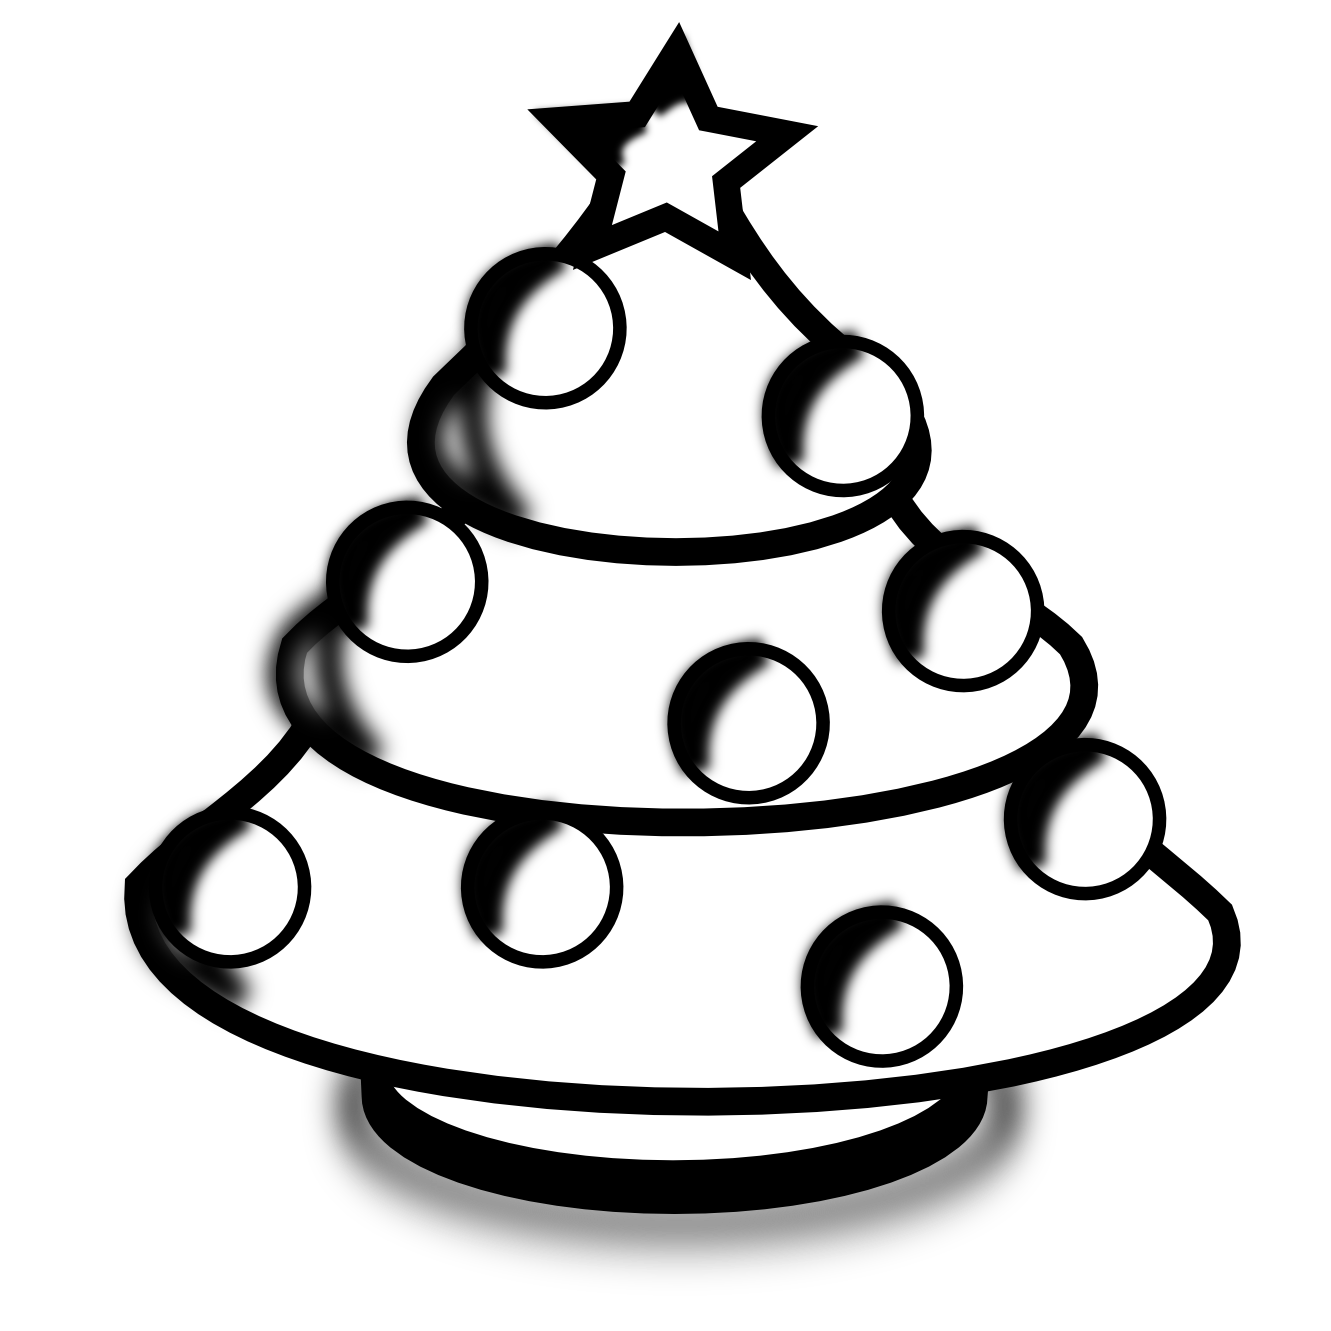 Kawaii Christmas Tree Drawing Outline Sketch Vector, Christmas Tree Drawing,  Christmas Tree Outline, Christmas Tree Sketch PNG and Vector with  Transparent Background for Free Download